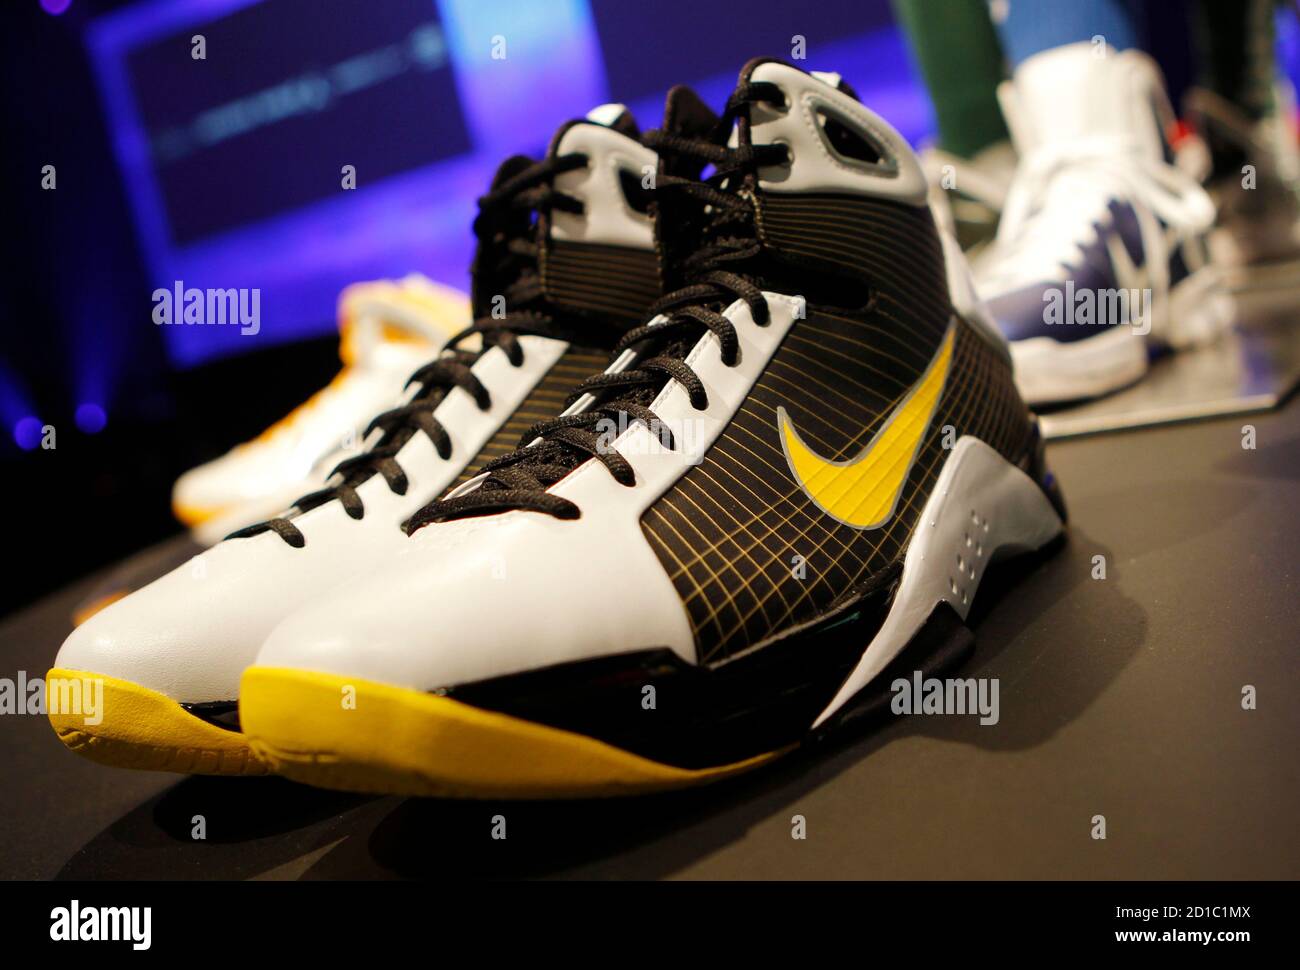 The Nike Hyperdunk 2010 basketball shoe is seen on display at the Nike  Investor meeting event in New York, May 5, 2010. REUTERS/Mike Segar (UNITED  STATES - Tags: BUSINESS SPORT Stock Photo - Alamy